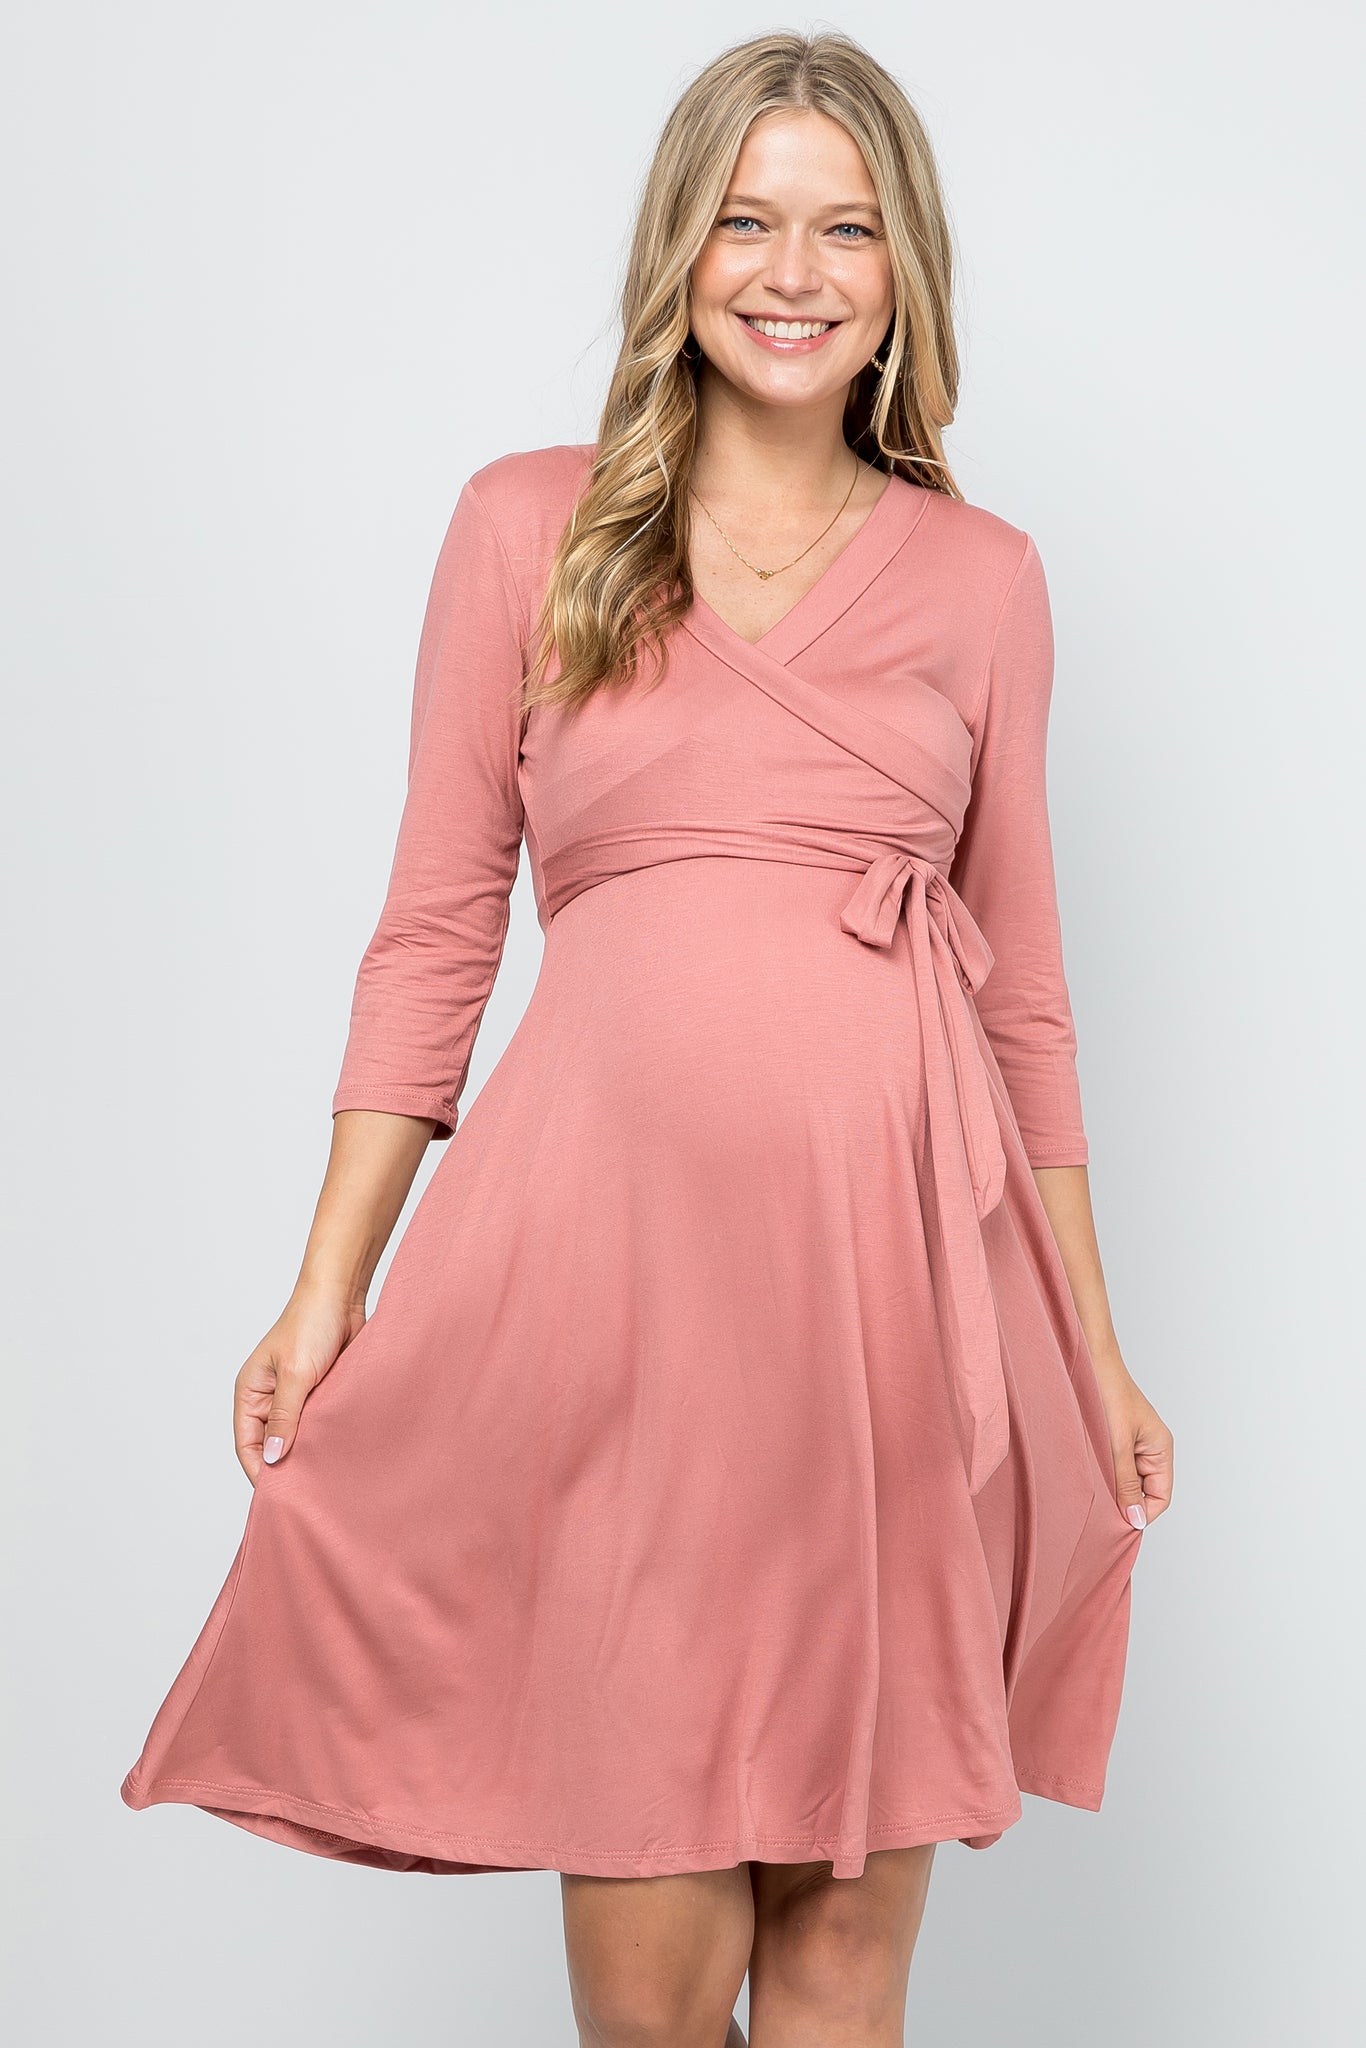 Lolmot Womens Ruched Maternity Dress Comfy Stretchy Solid Color